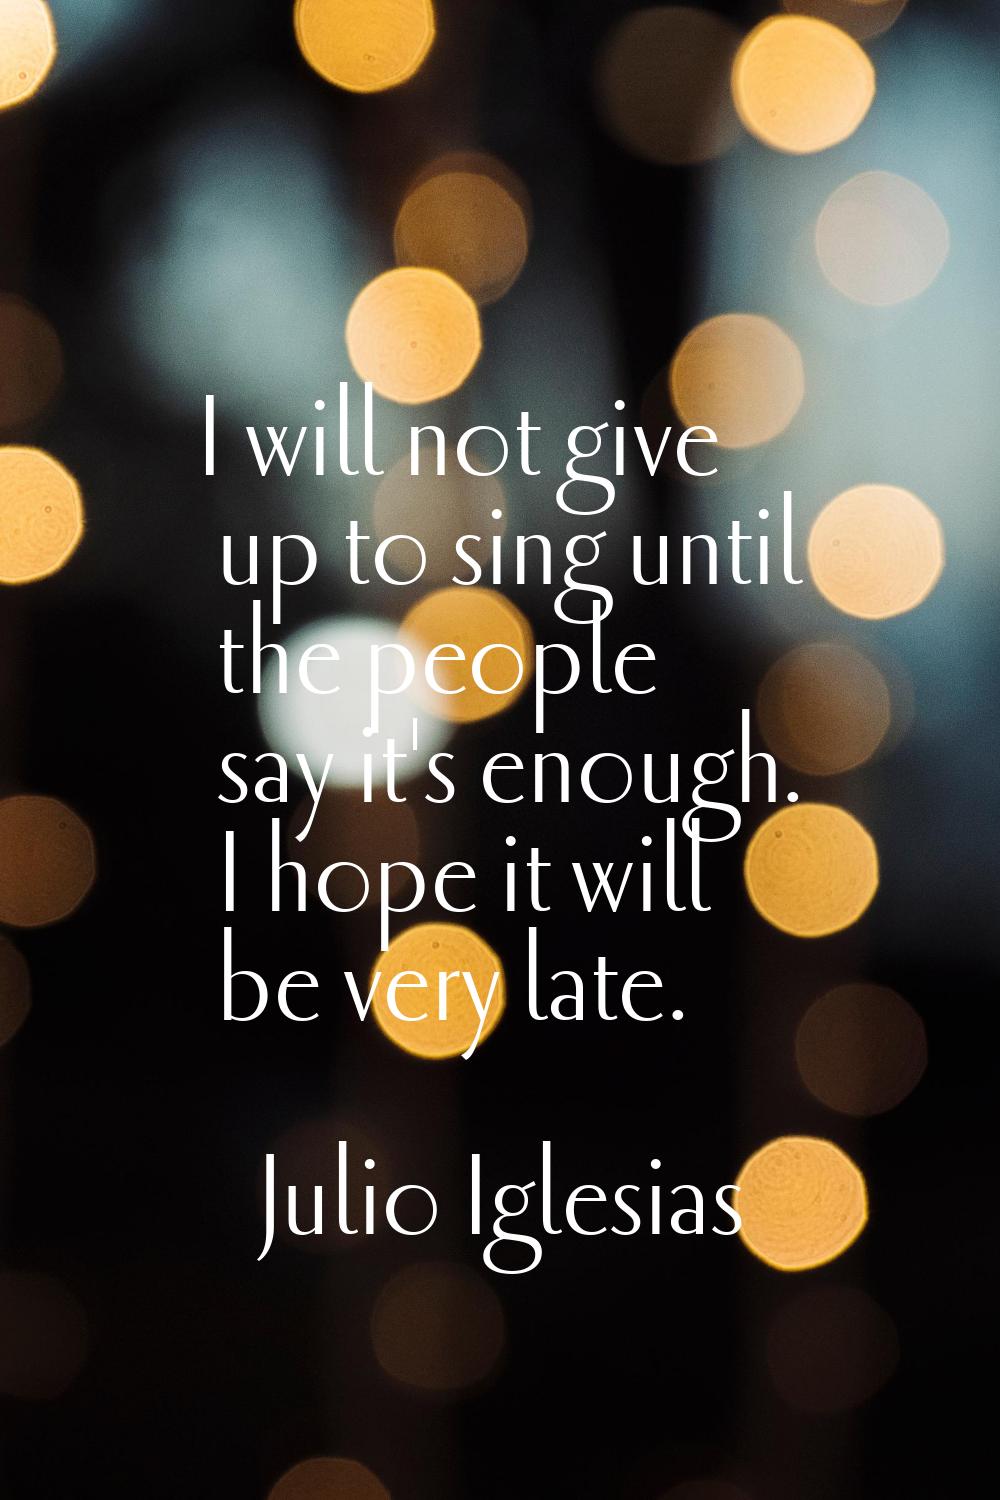 I will not give up to sing until the people say it's enough. I hope it will be very late.